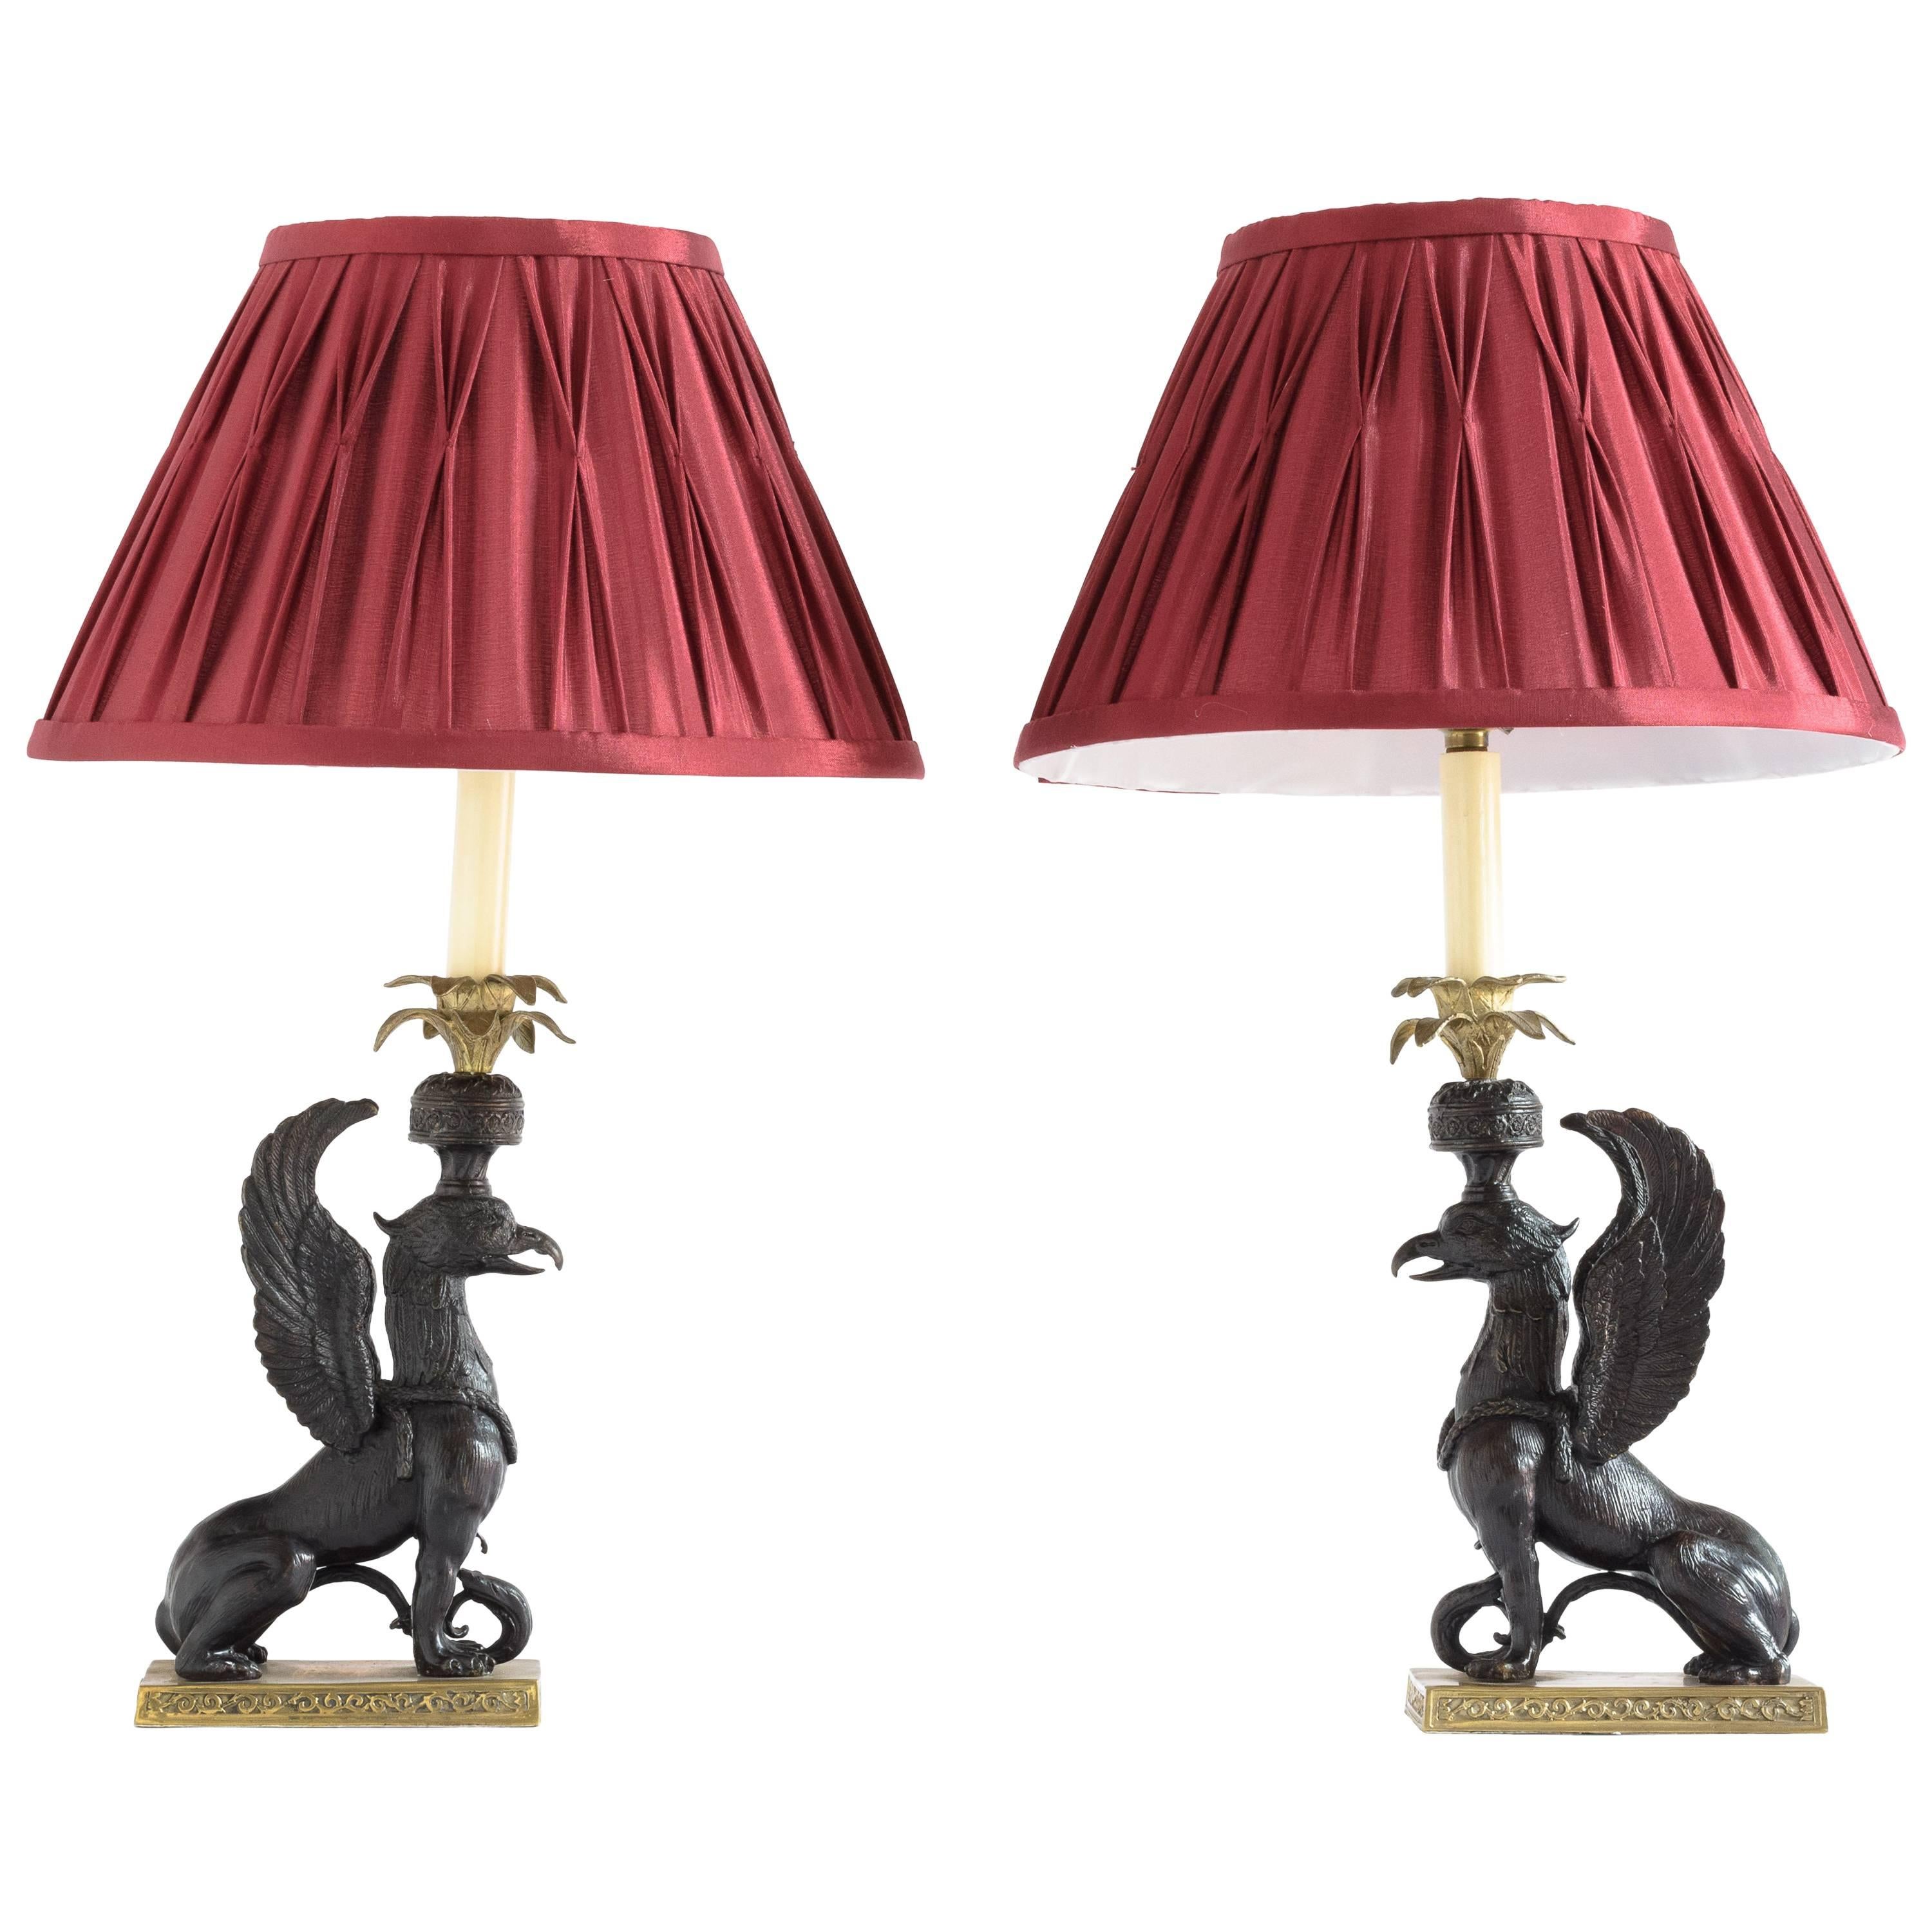 Winged Griffin Table Lamps After Sir William Chambers